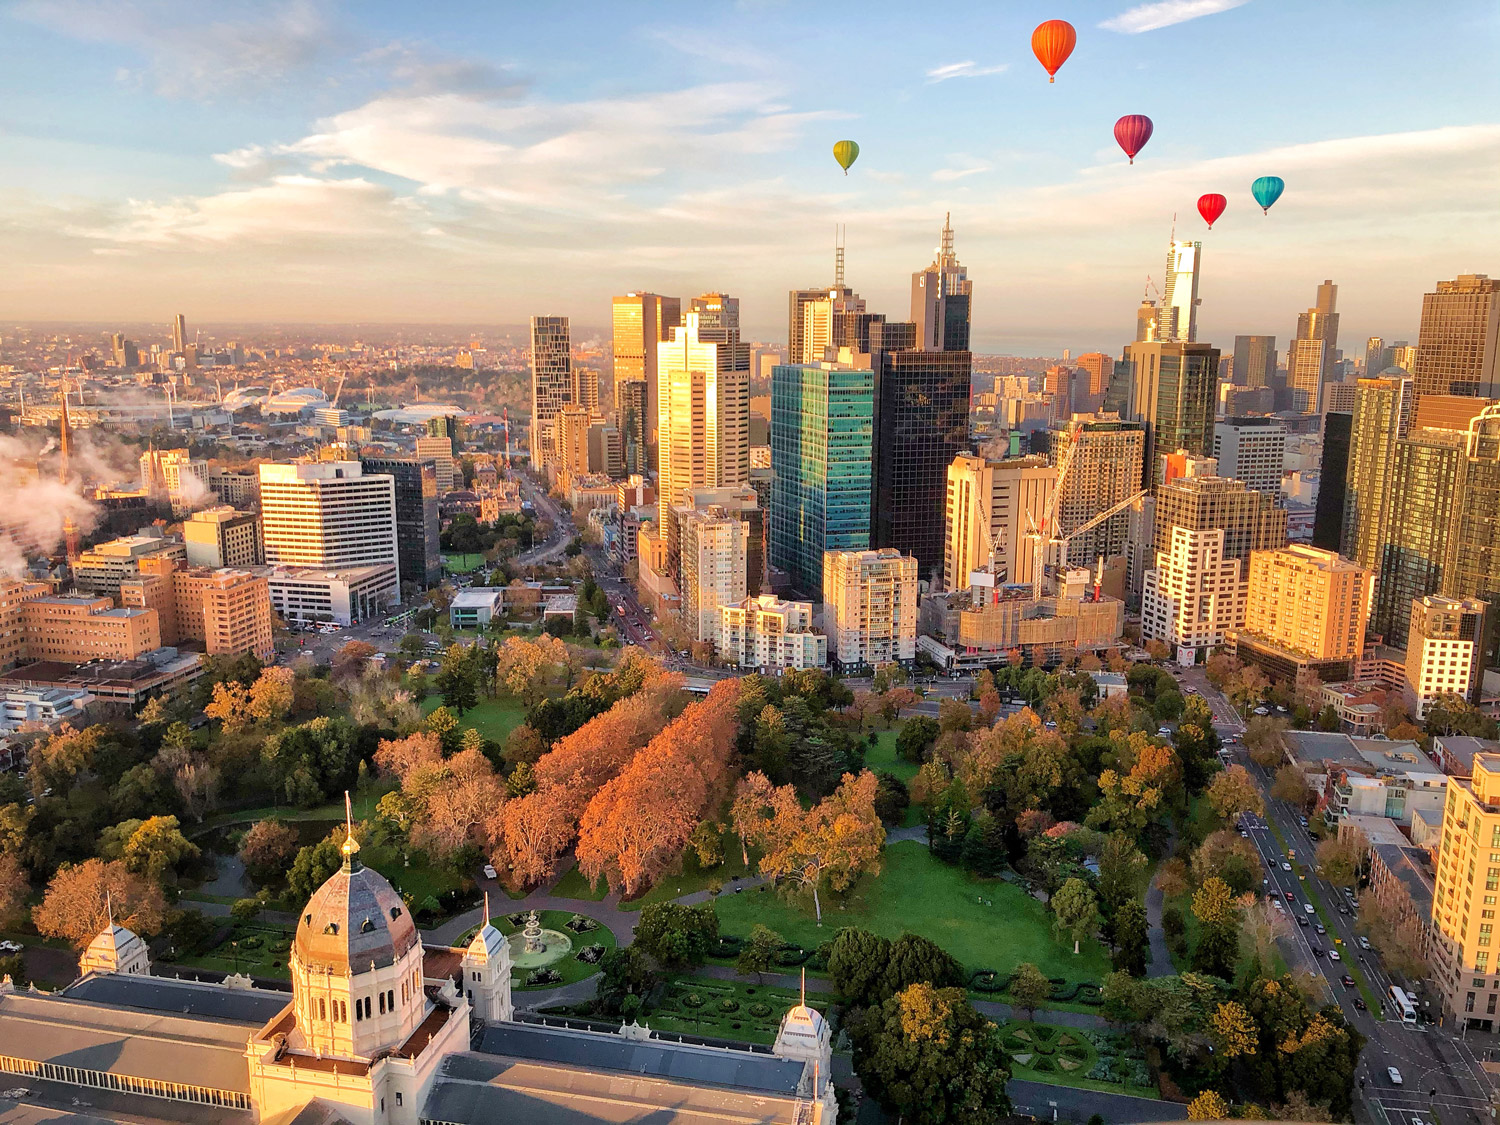 Melbourne, Victoria: You’ll never want to leave